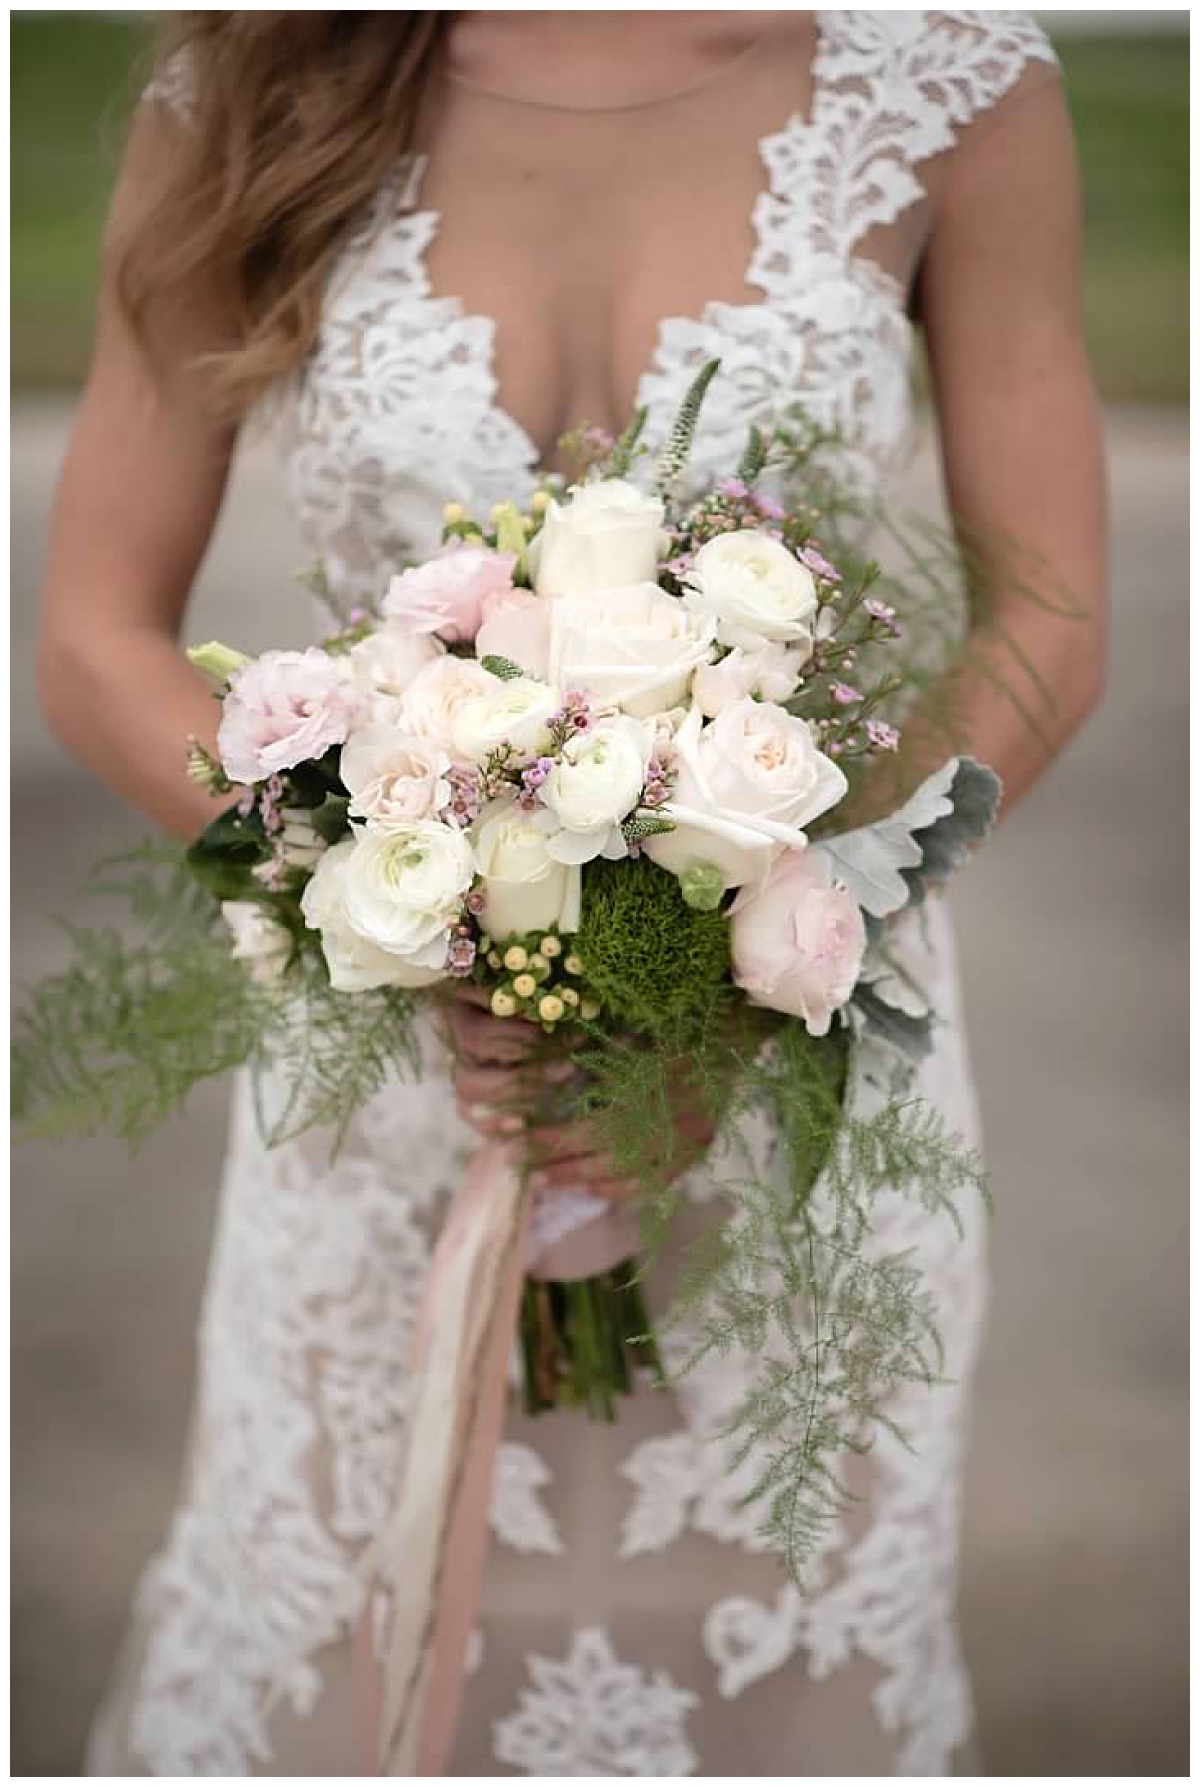 Classic Blush and Cream Hand-tied Bridal Bouquet for a Winter Wedding by Emery's Buffalo Creek Floral team 